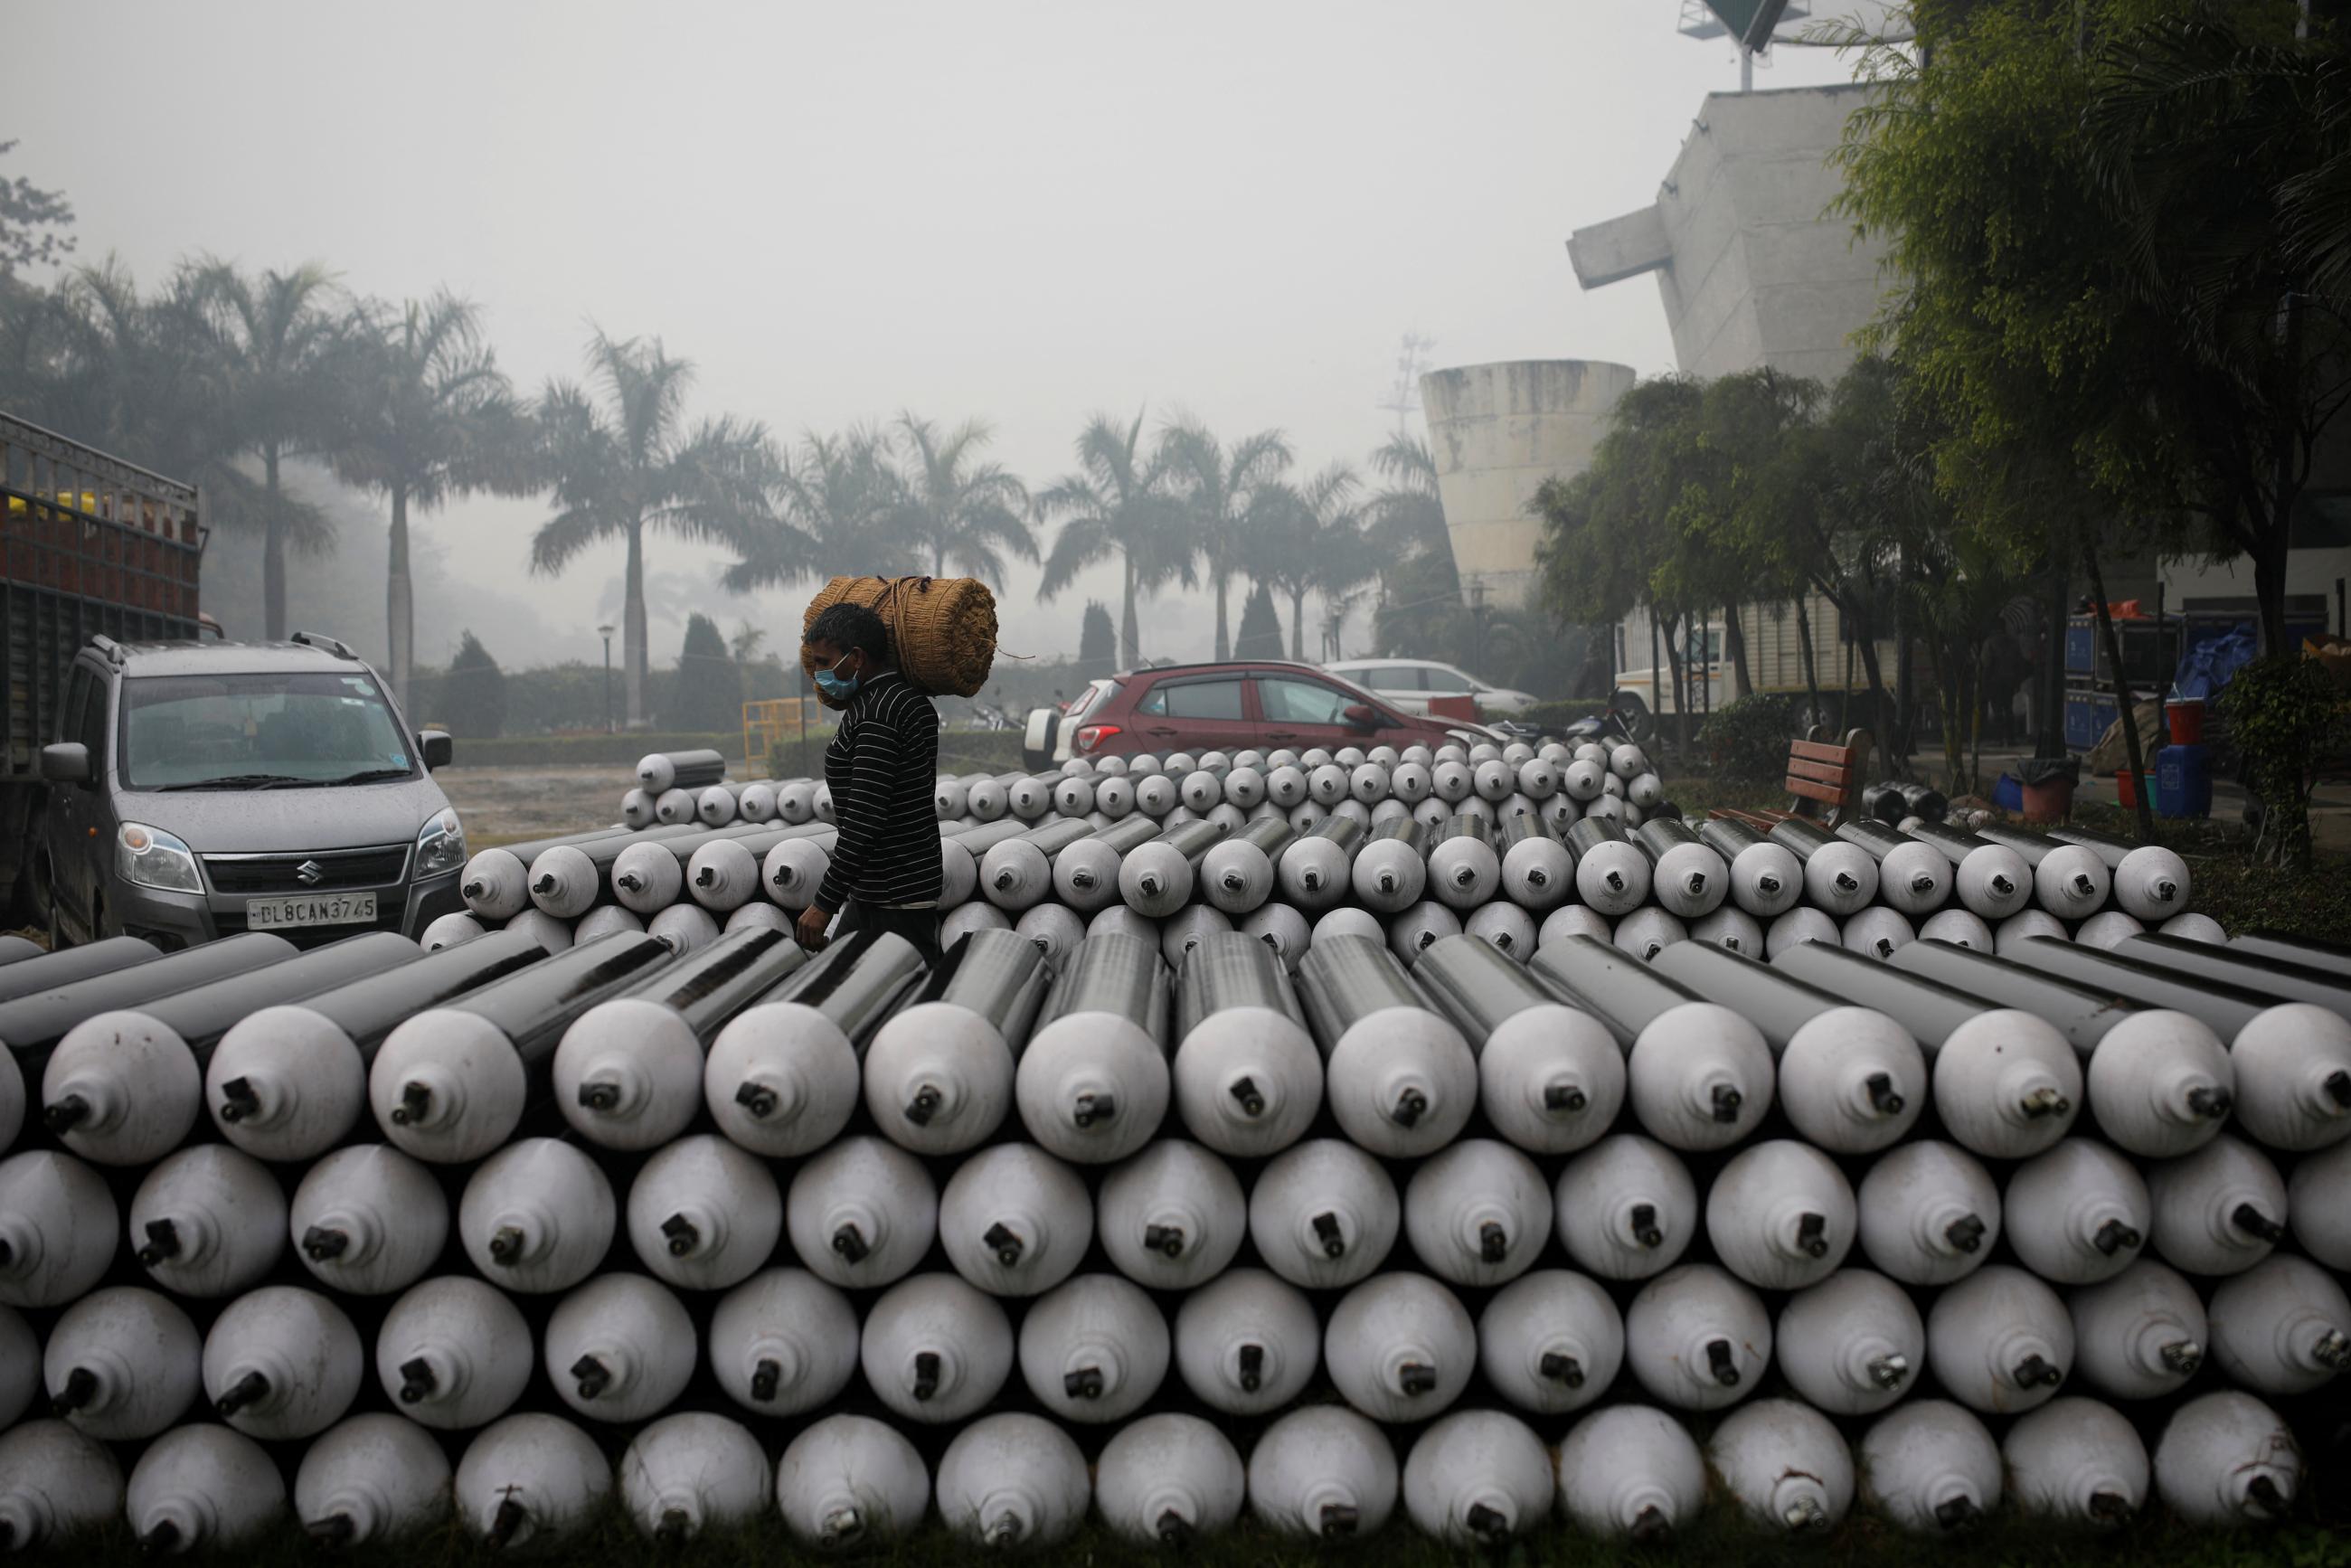 A laborer walks past the empty oxygen cylinders outside a coronavirus disease (COVID-19) care centre at an indoor sports complex amid the spread of the disease, in New Delhi, India, January 5, 2022.